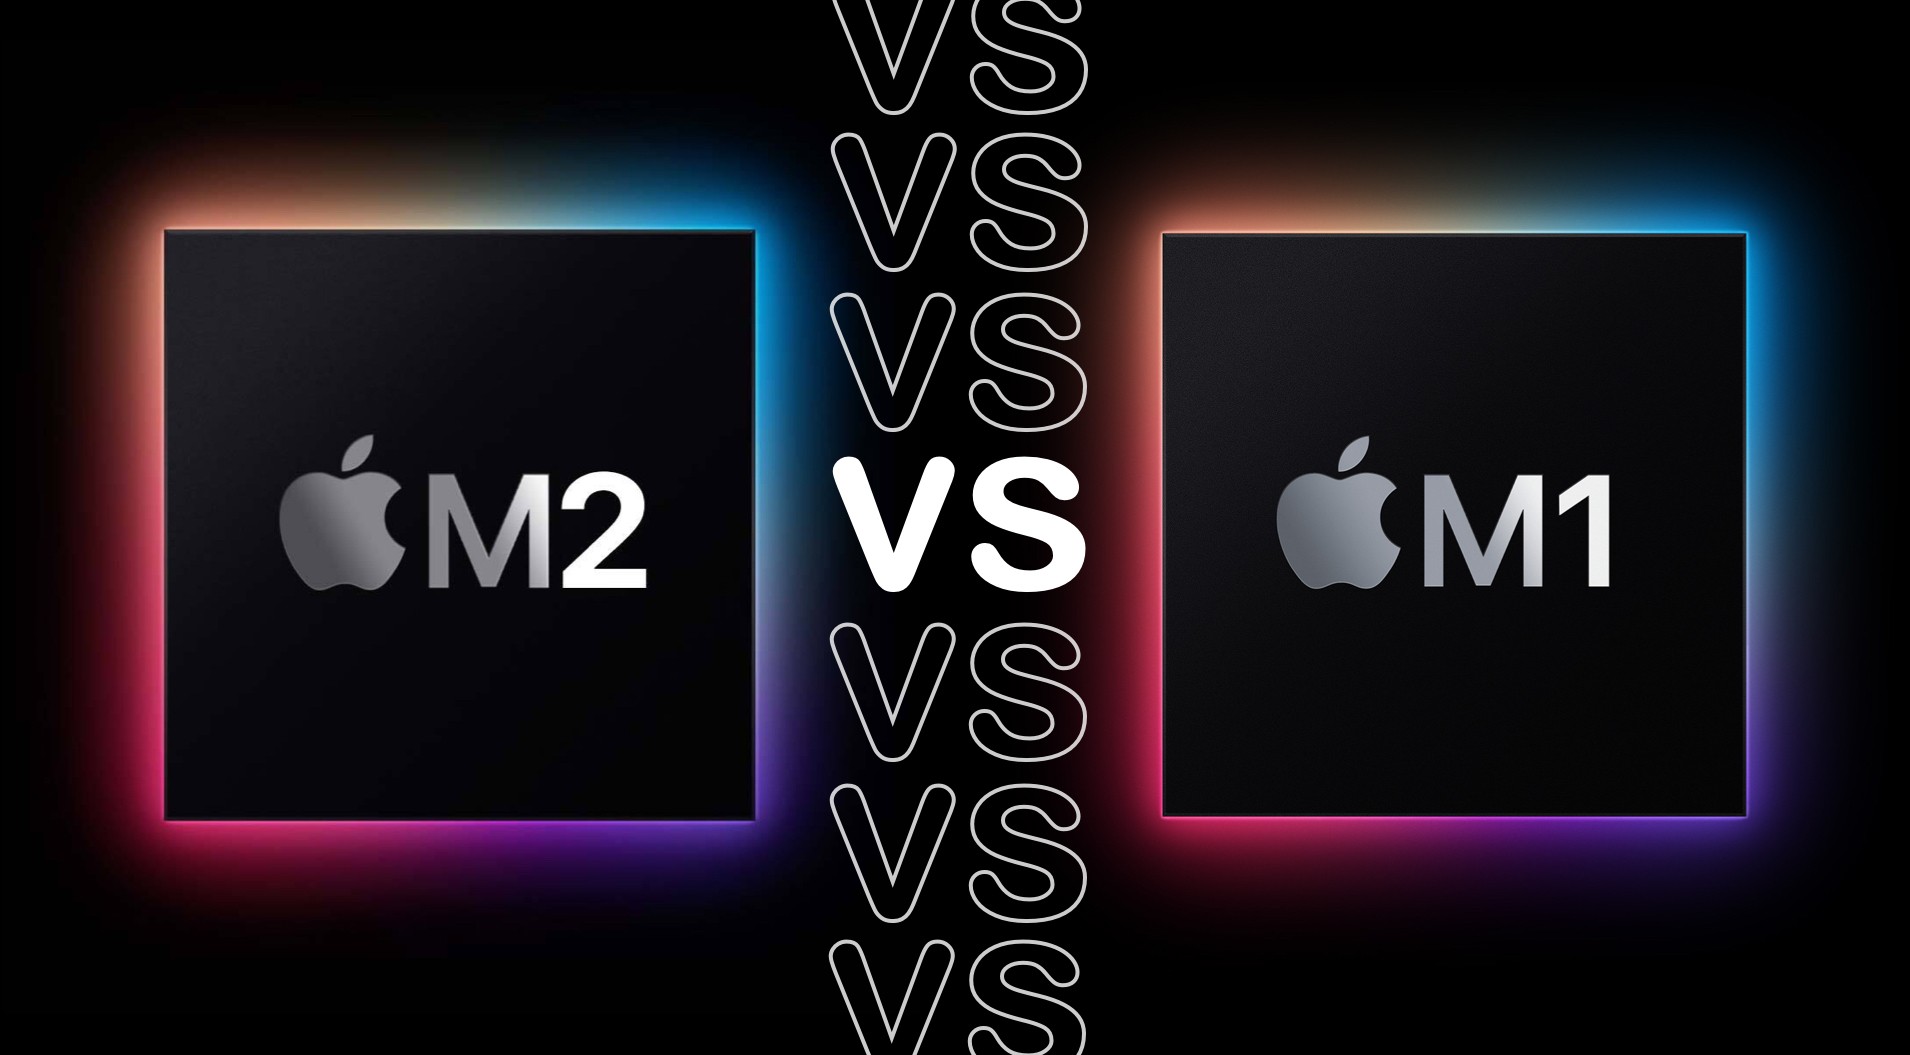 Apple M1 vs M2: What’s the difference?